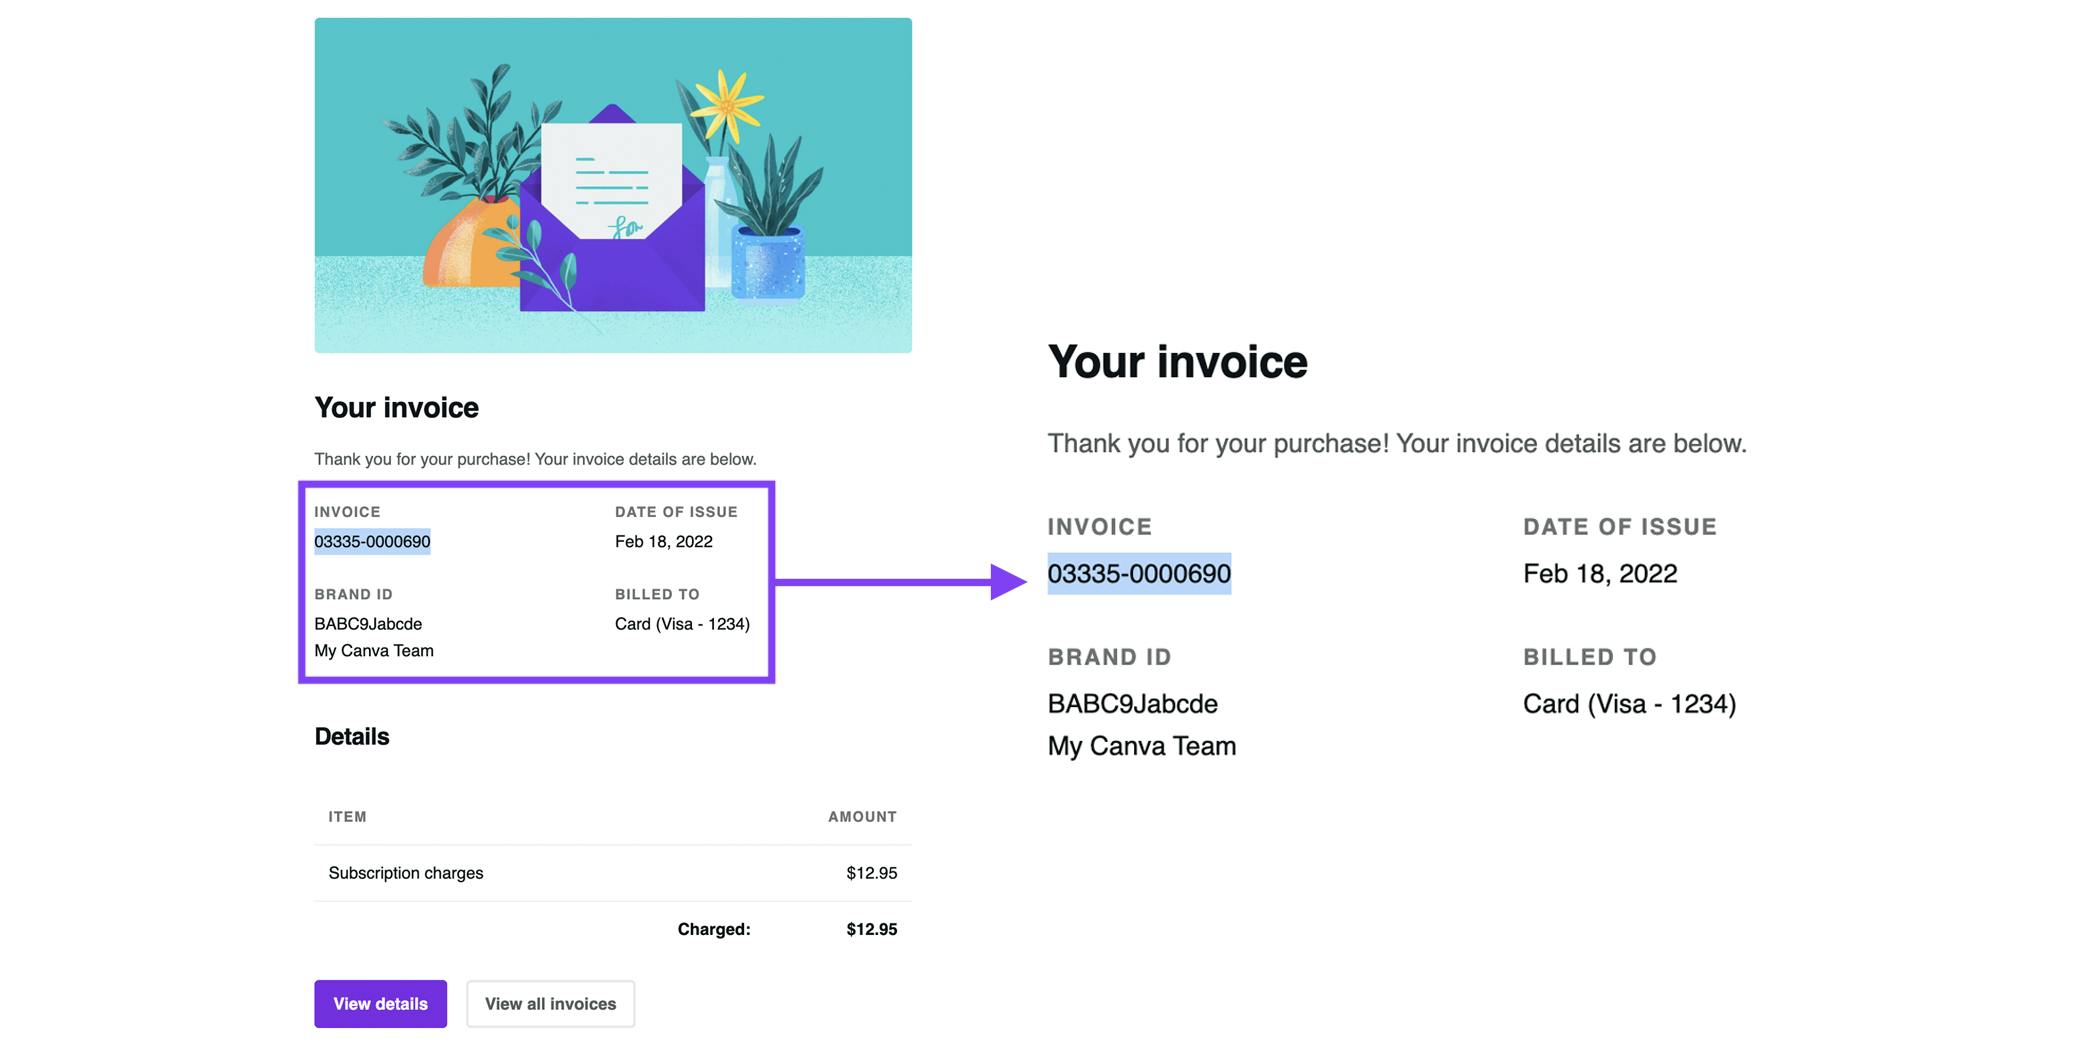 Ways to find and read invoices - Canva Help Center